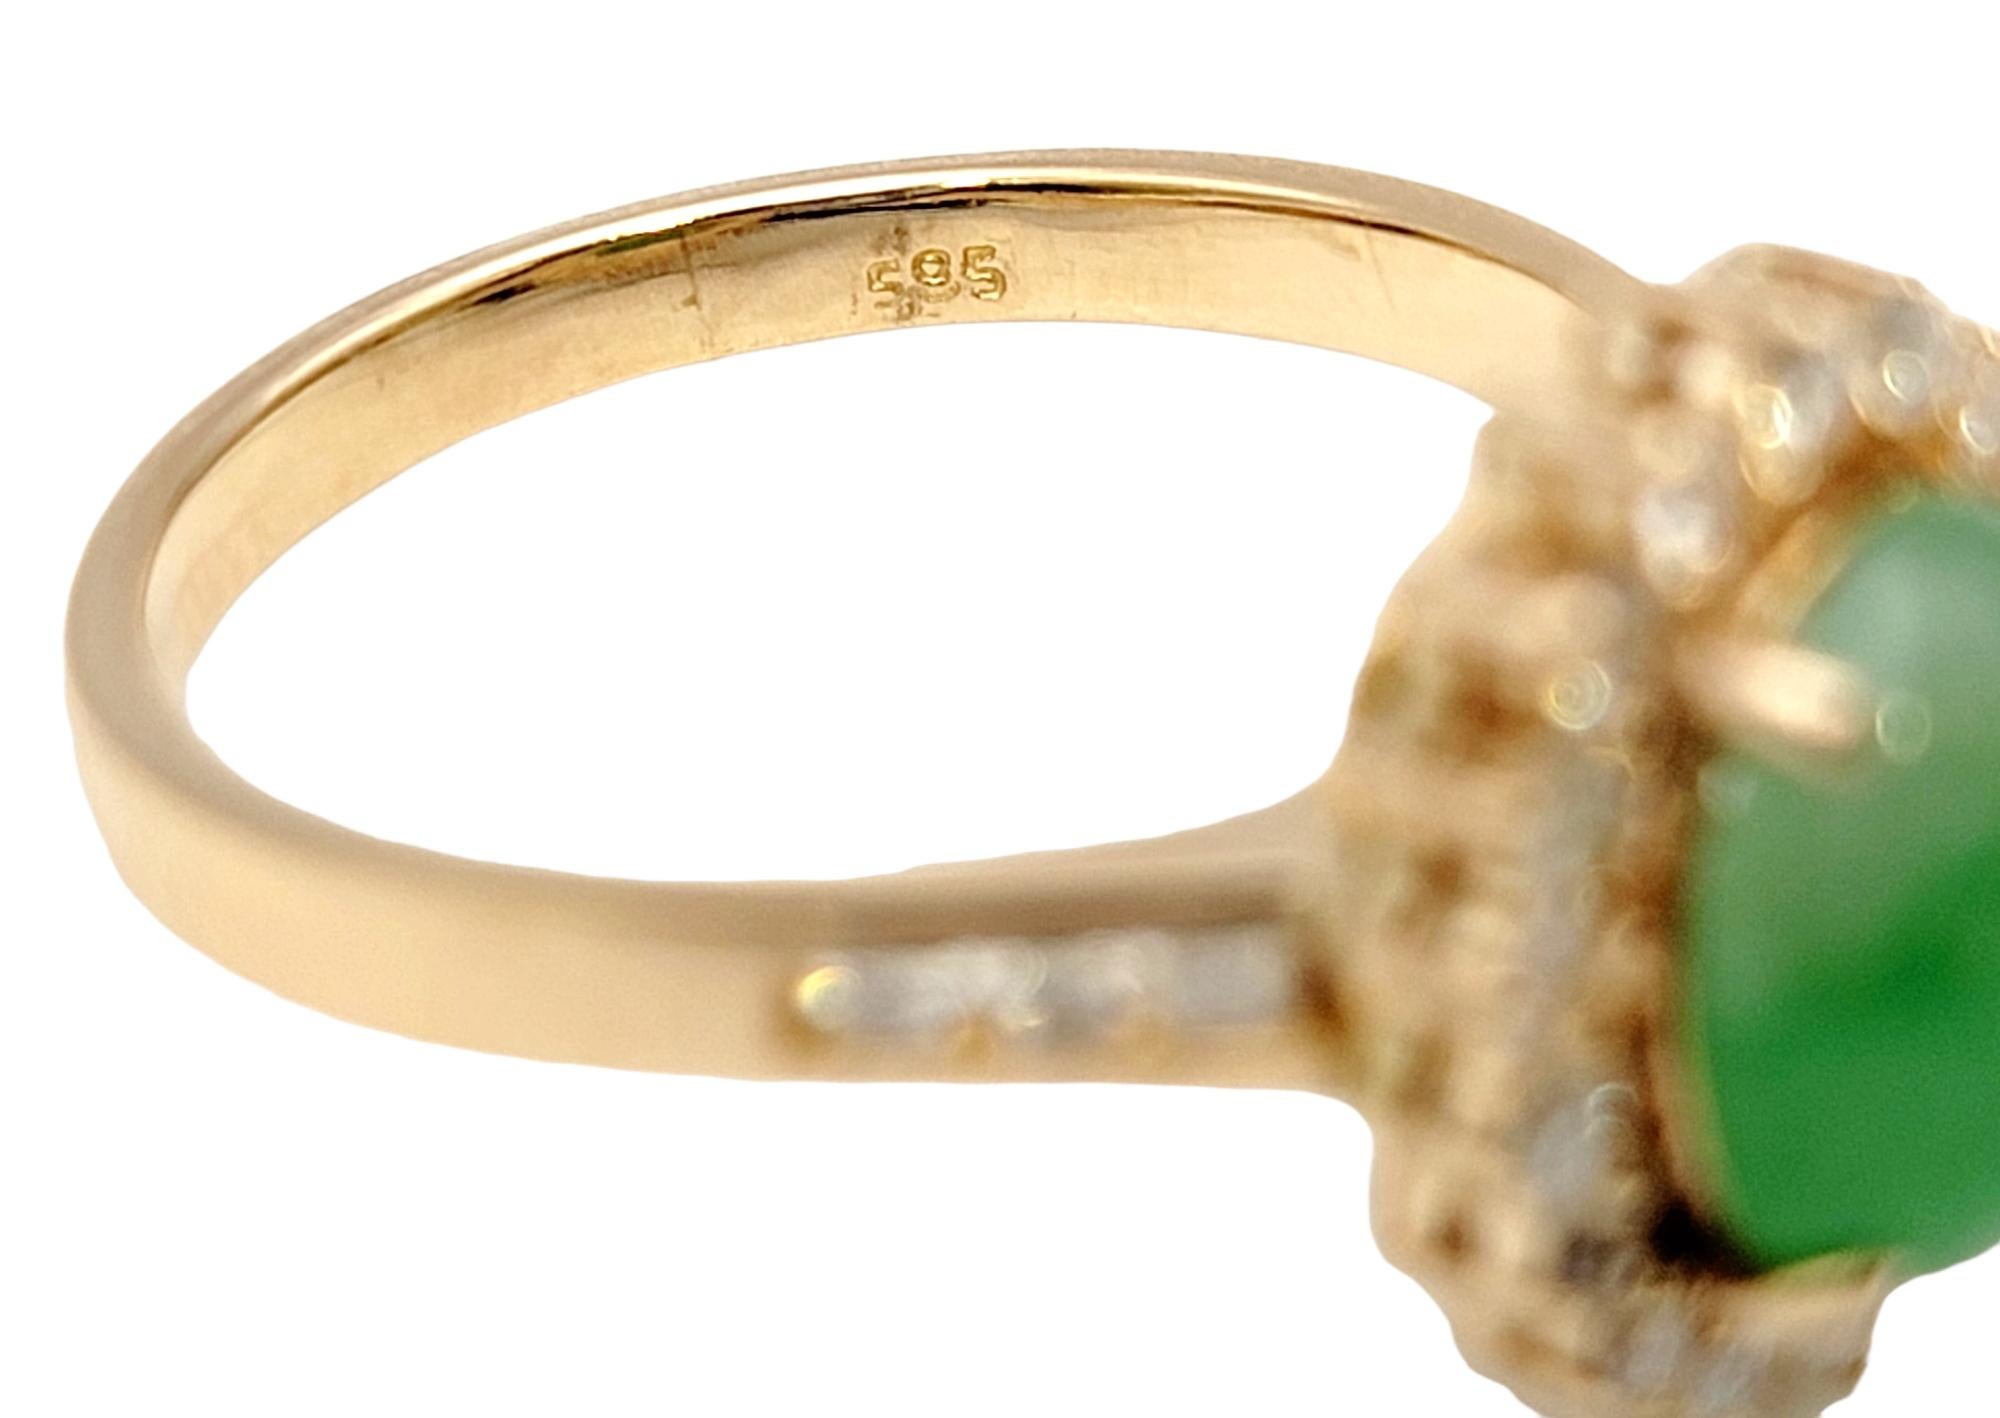 Natural Oval Cabochon Jade and Diamond Halo Ring in 14 Karat Yellow Gold For Sale 3